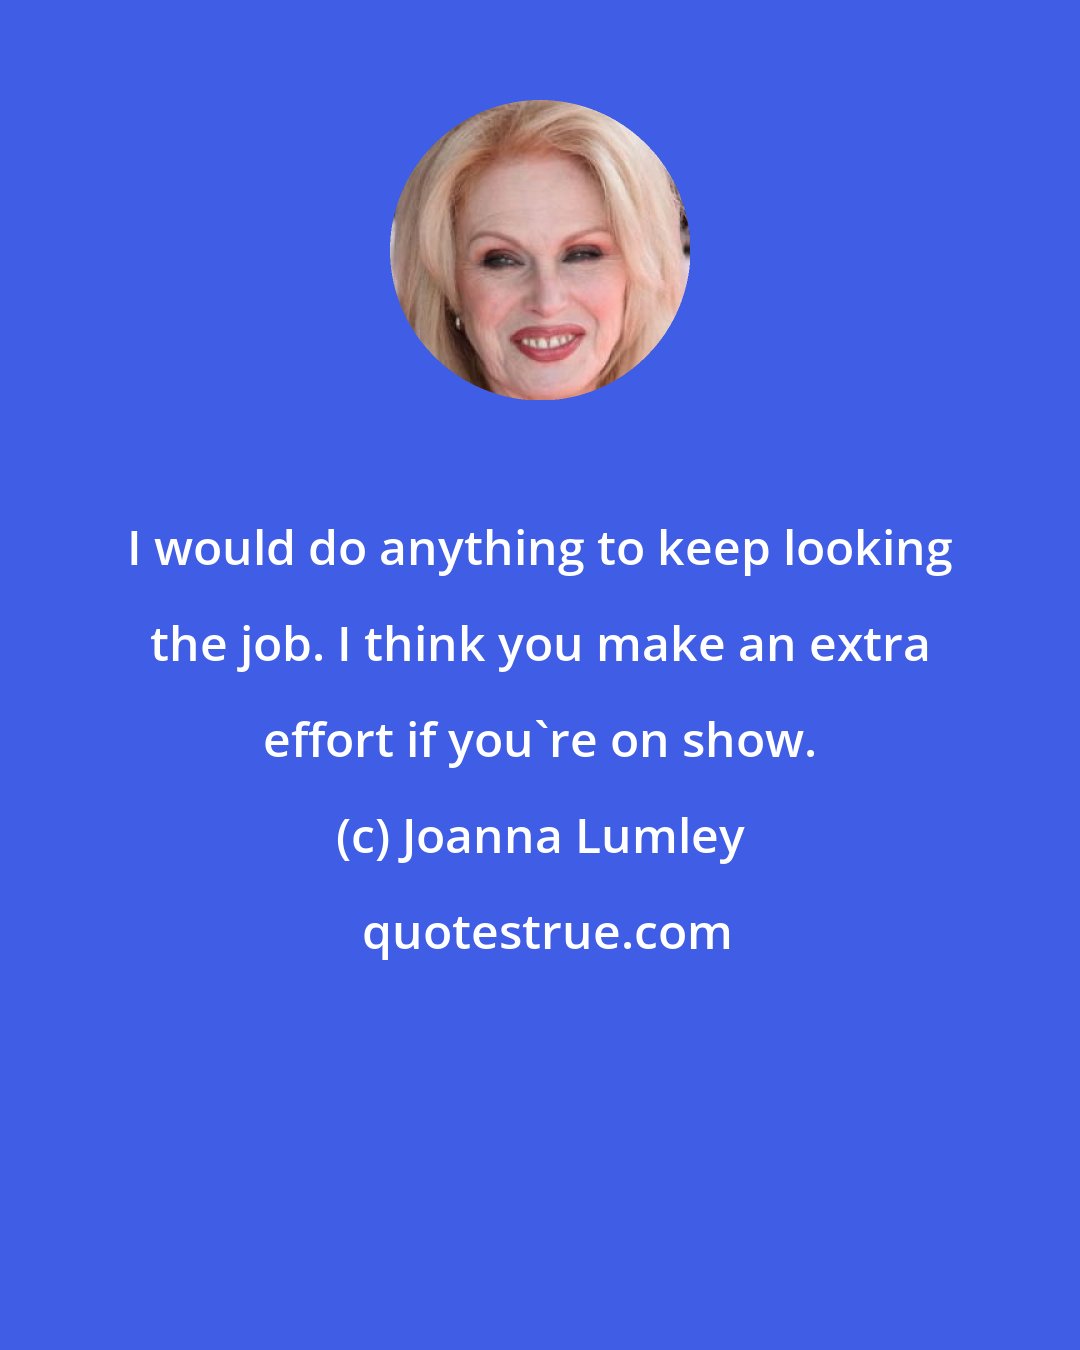 Joanna Lumley: I would do anything to keep looking the job. I think you make an extra effort if you're on show.